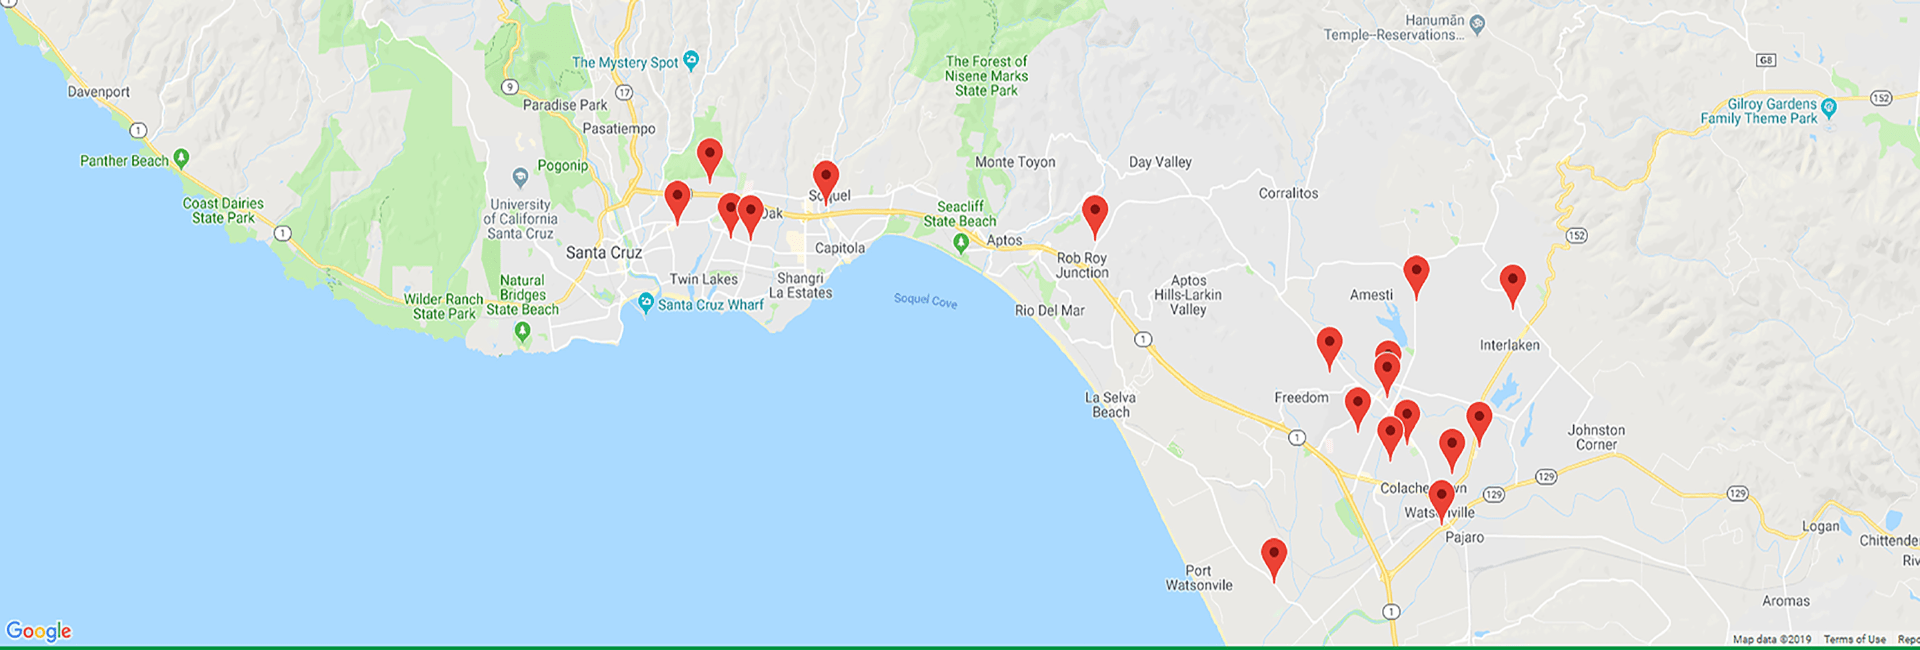 map image of the Santa Cruz Harbor area and the food distribution locations for the food bank